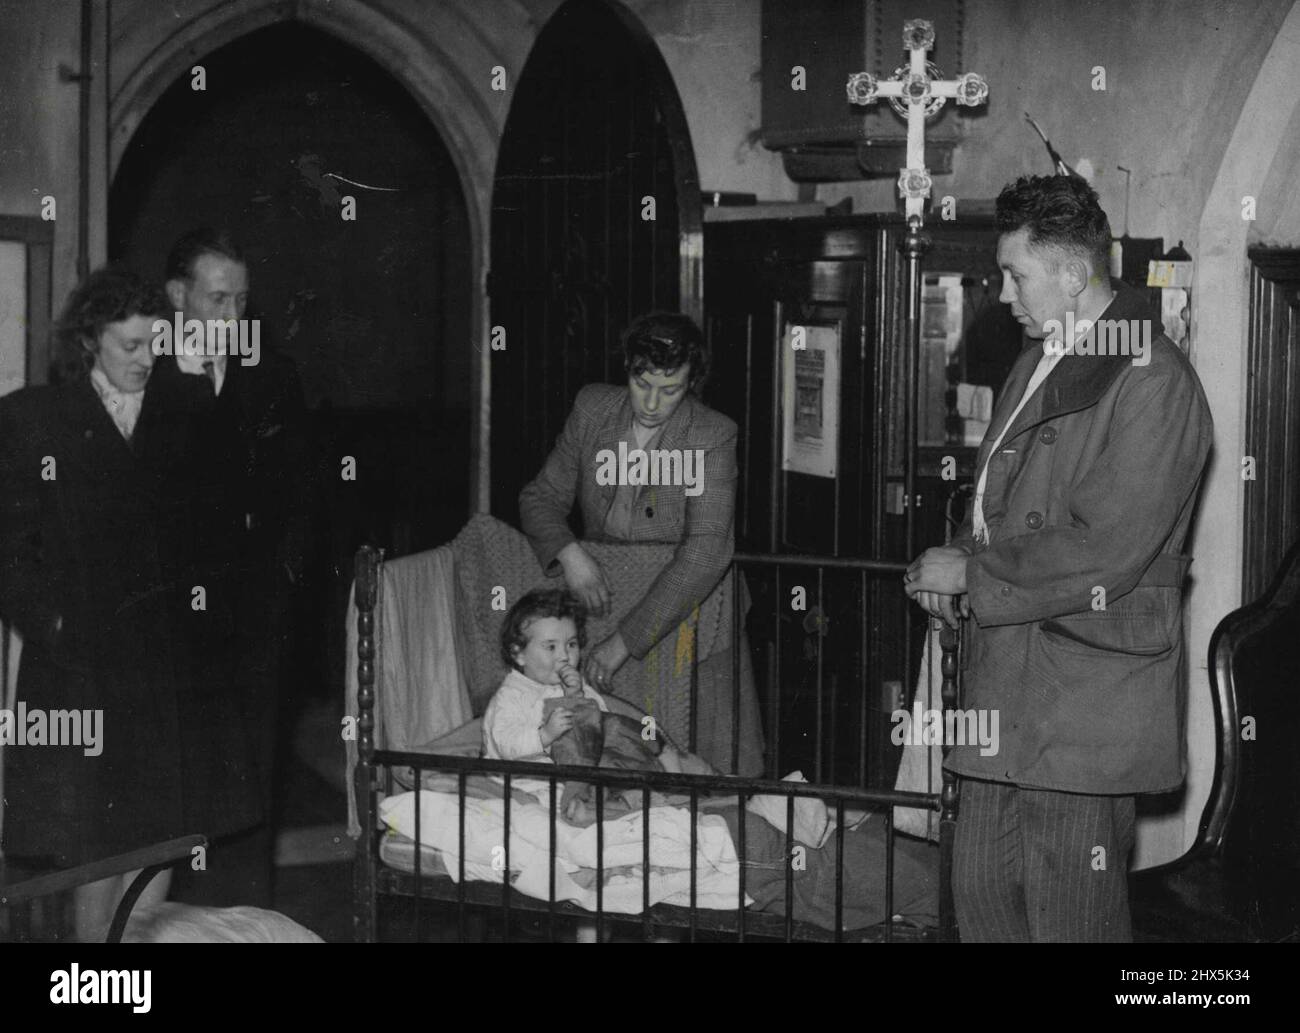 Family Squat in church. After a fruitless search for somewhere to live, Mr. and Mrs. F. Offord and their baby daughter settled in the vestry of a church in Bexley Heath, England. They previously lived in a children's nursery, but were given notice to quit. December 14, 1946. (Photo by Associated Newspapers). Stock Photo